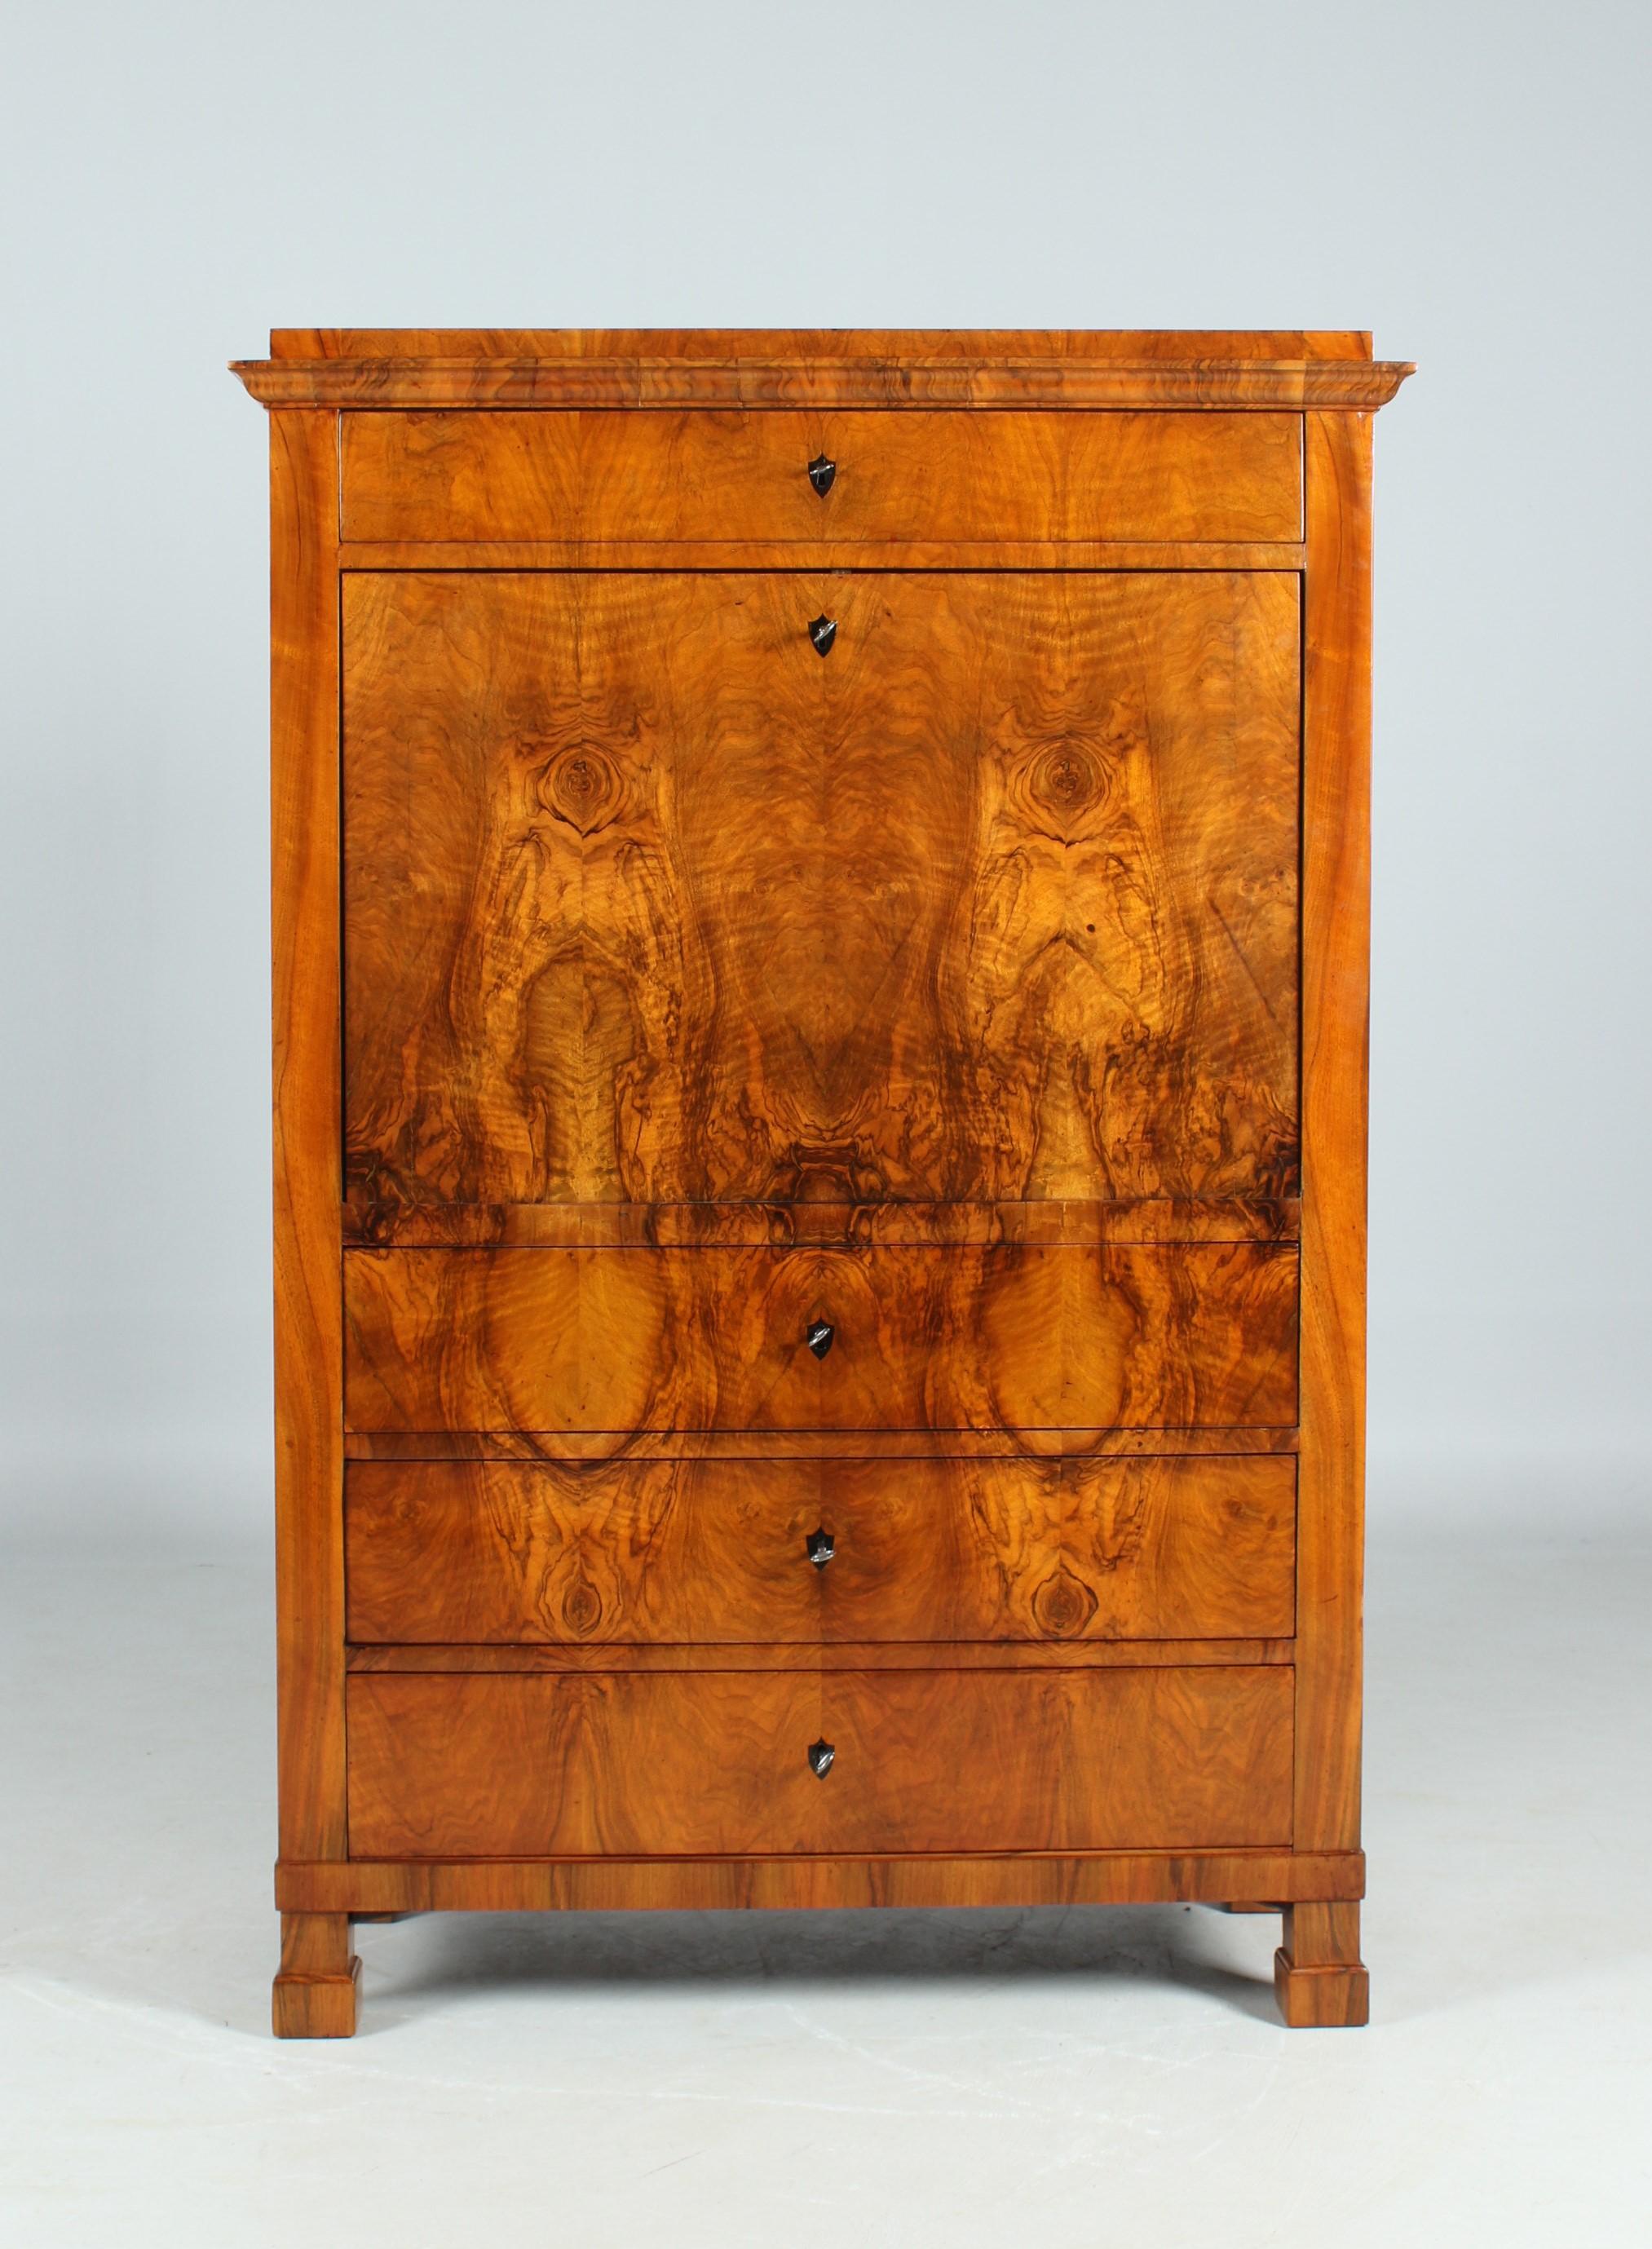 Antique Biedermeier Secretary

Austria
Walnut
Biedermeier around 1820

Dimensions: H x W x D: 158 x 108 x 49 cm

Description:
Strictly cubist secretary standing on square feet.

The furniture front and also the sides have a beautiful and